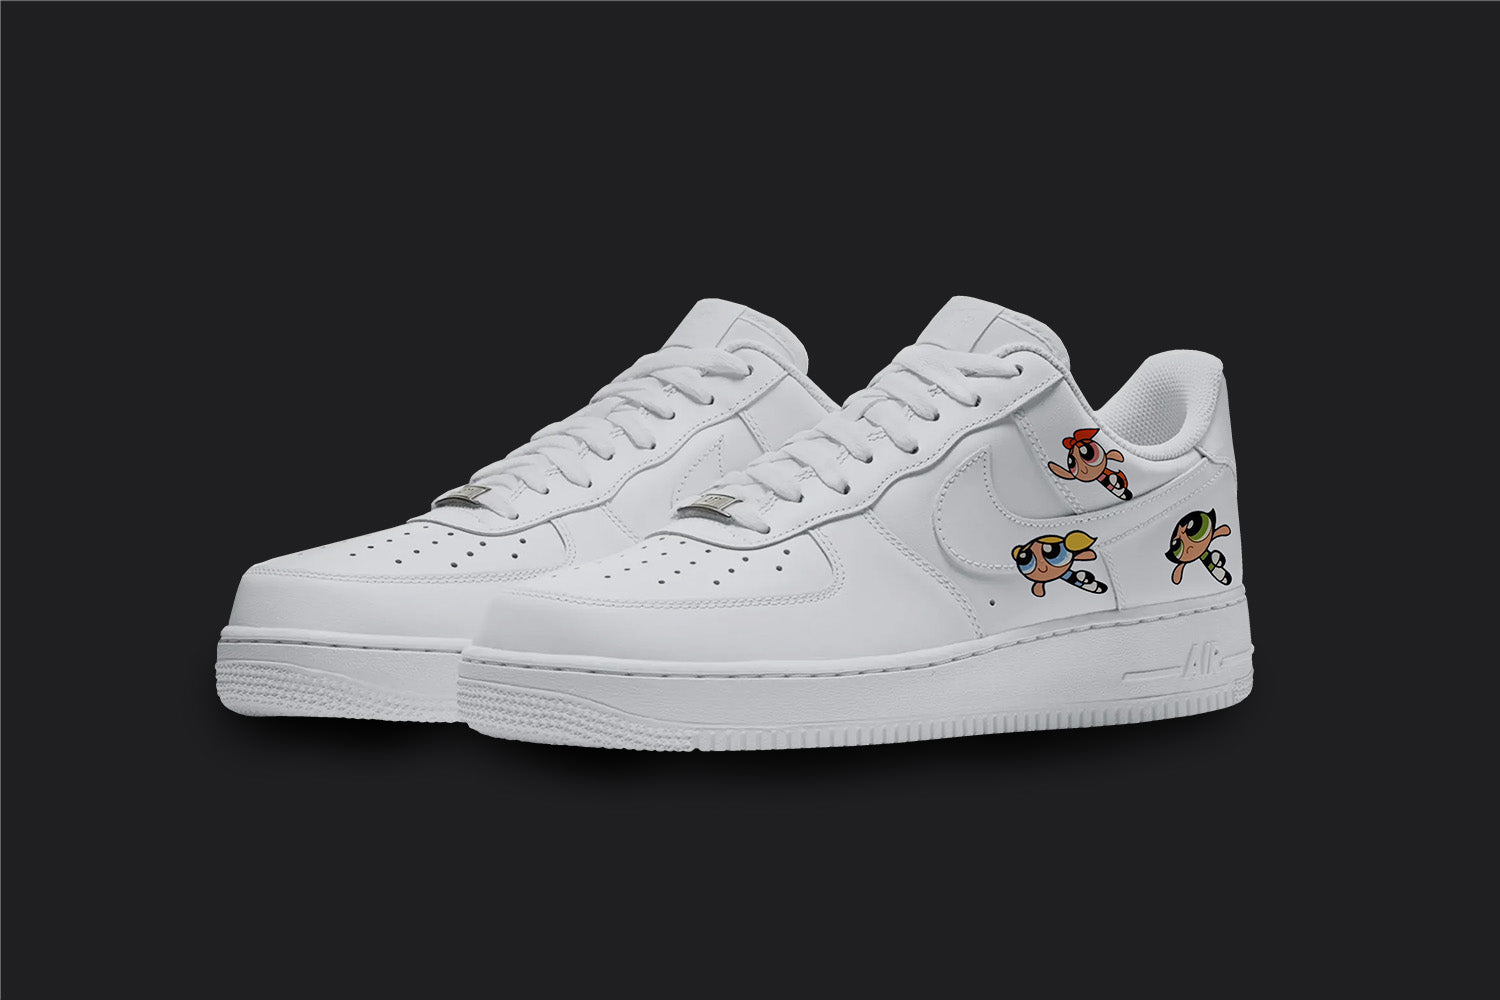 The image is of a Custom Nike Air force 1 sneaker pair on a blank black background. The white custom sneakers have 3 Power Puff Girls on the side of the sneakers.